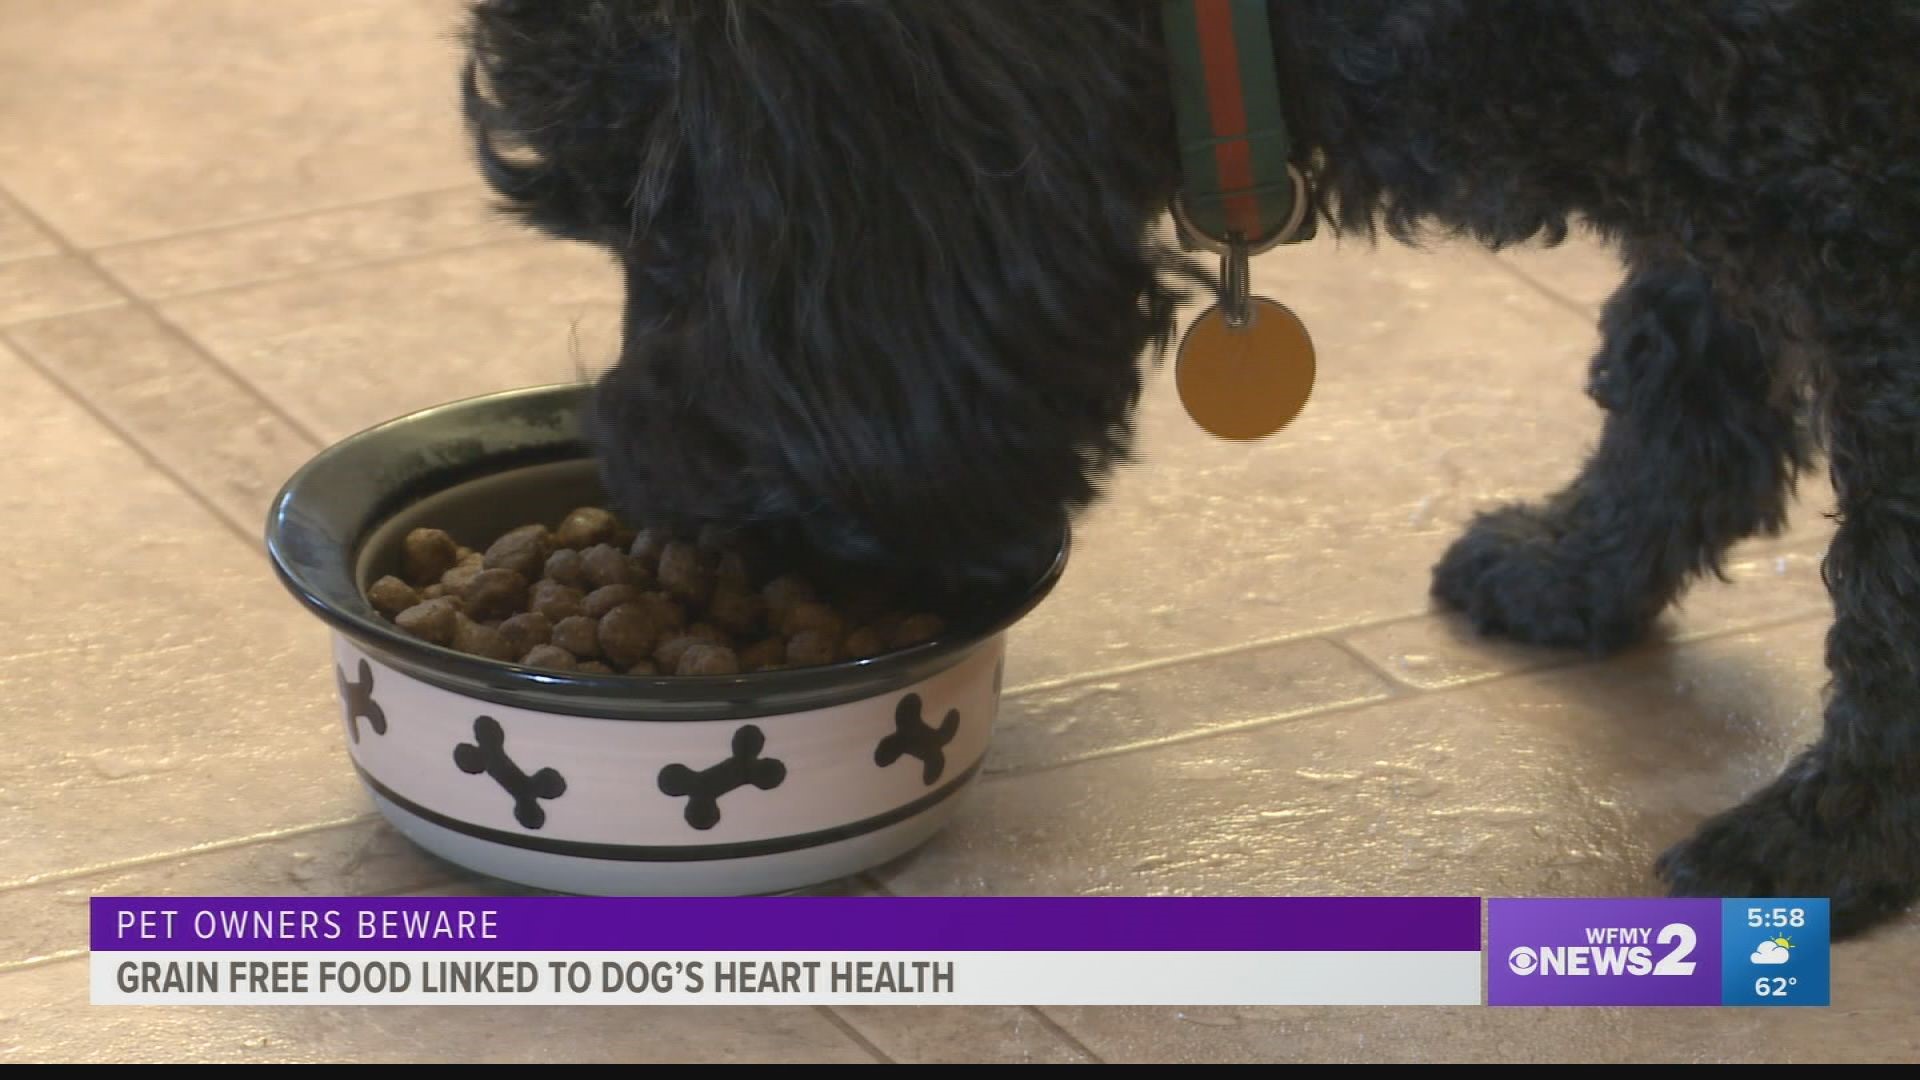 The FDA is investigating a possible link between grain-free food and heart failure in dogs.